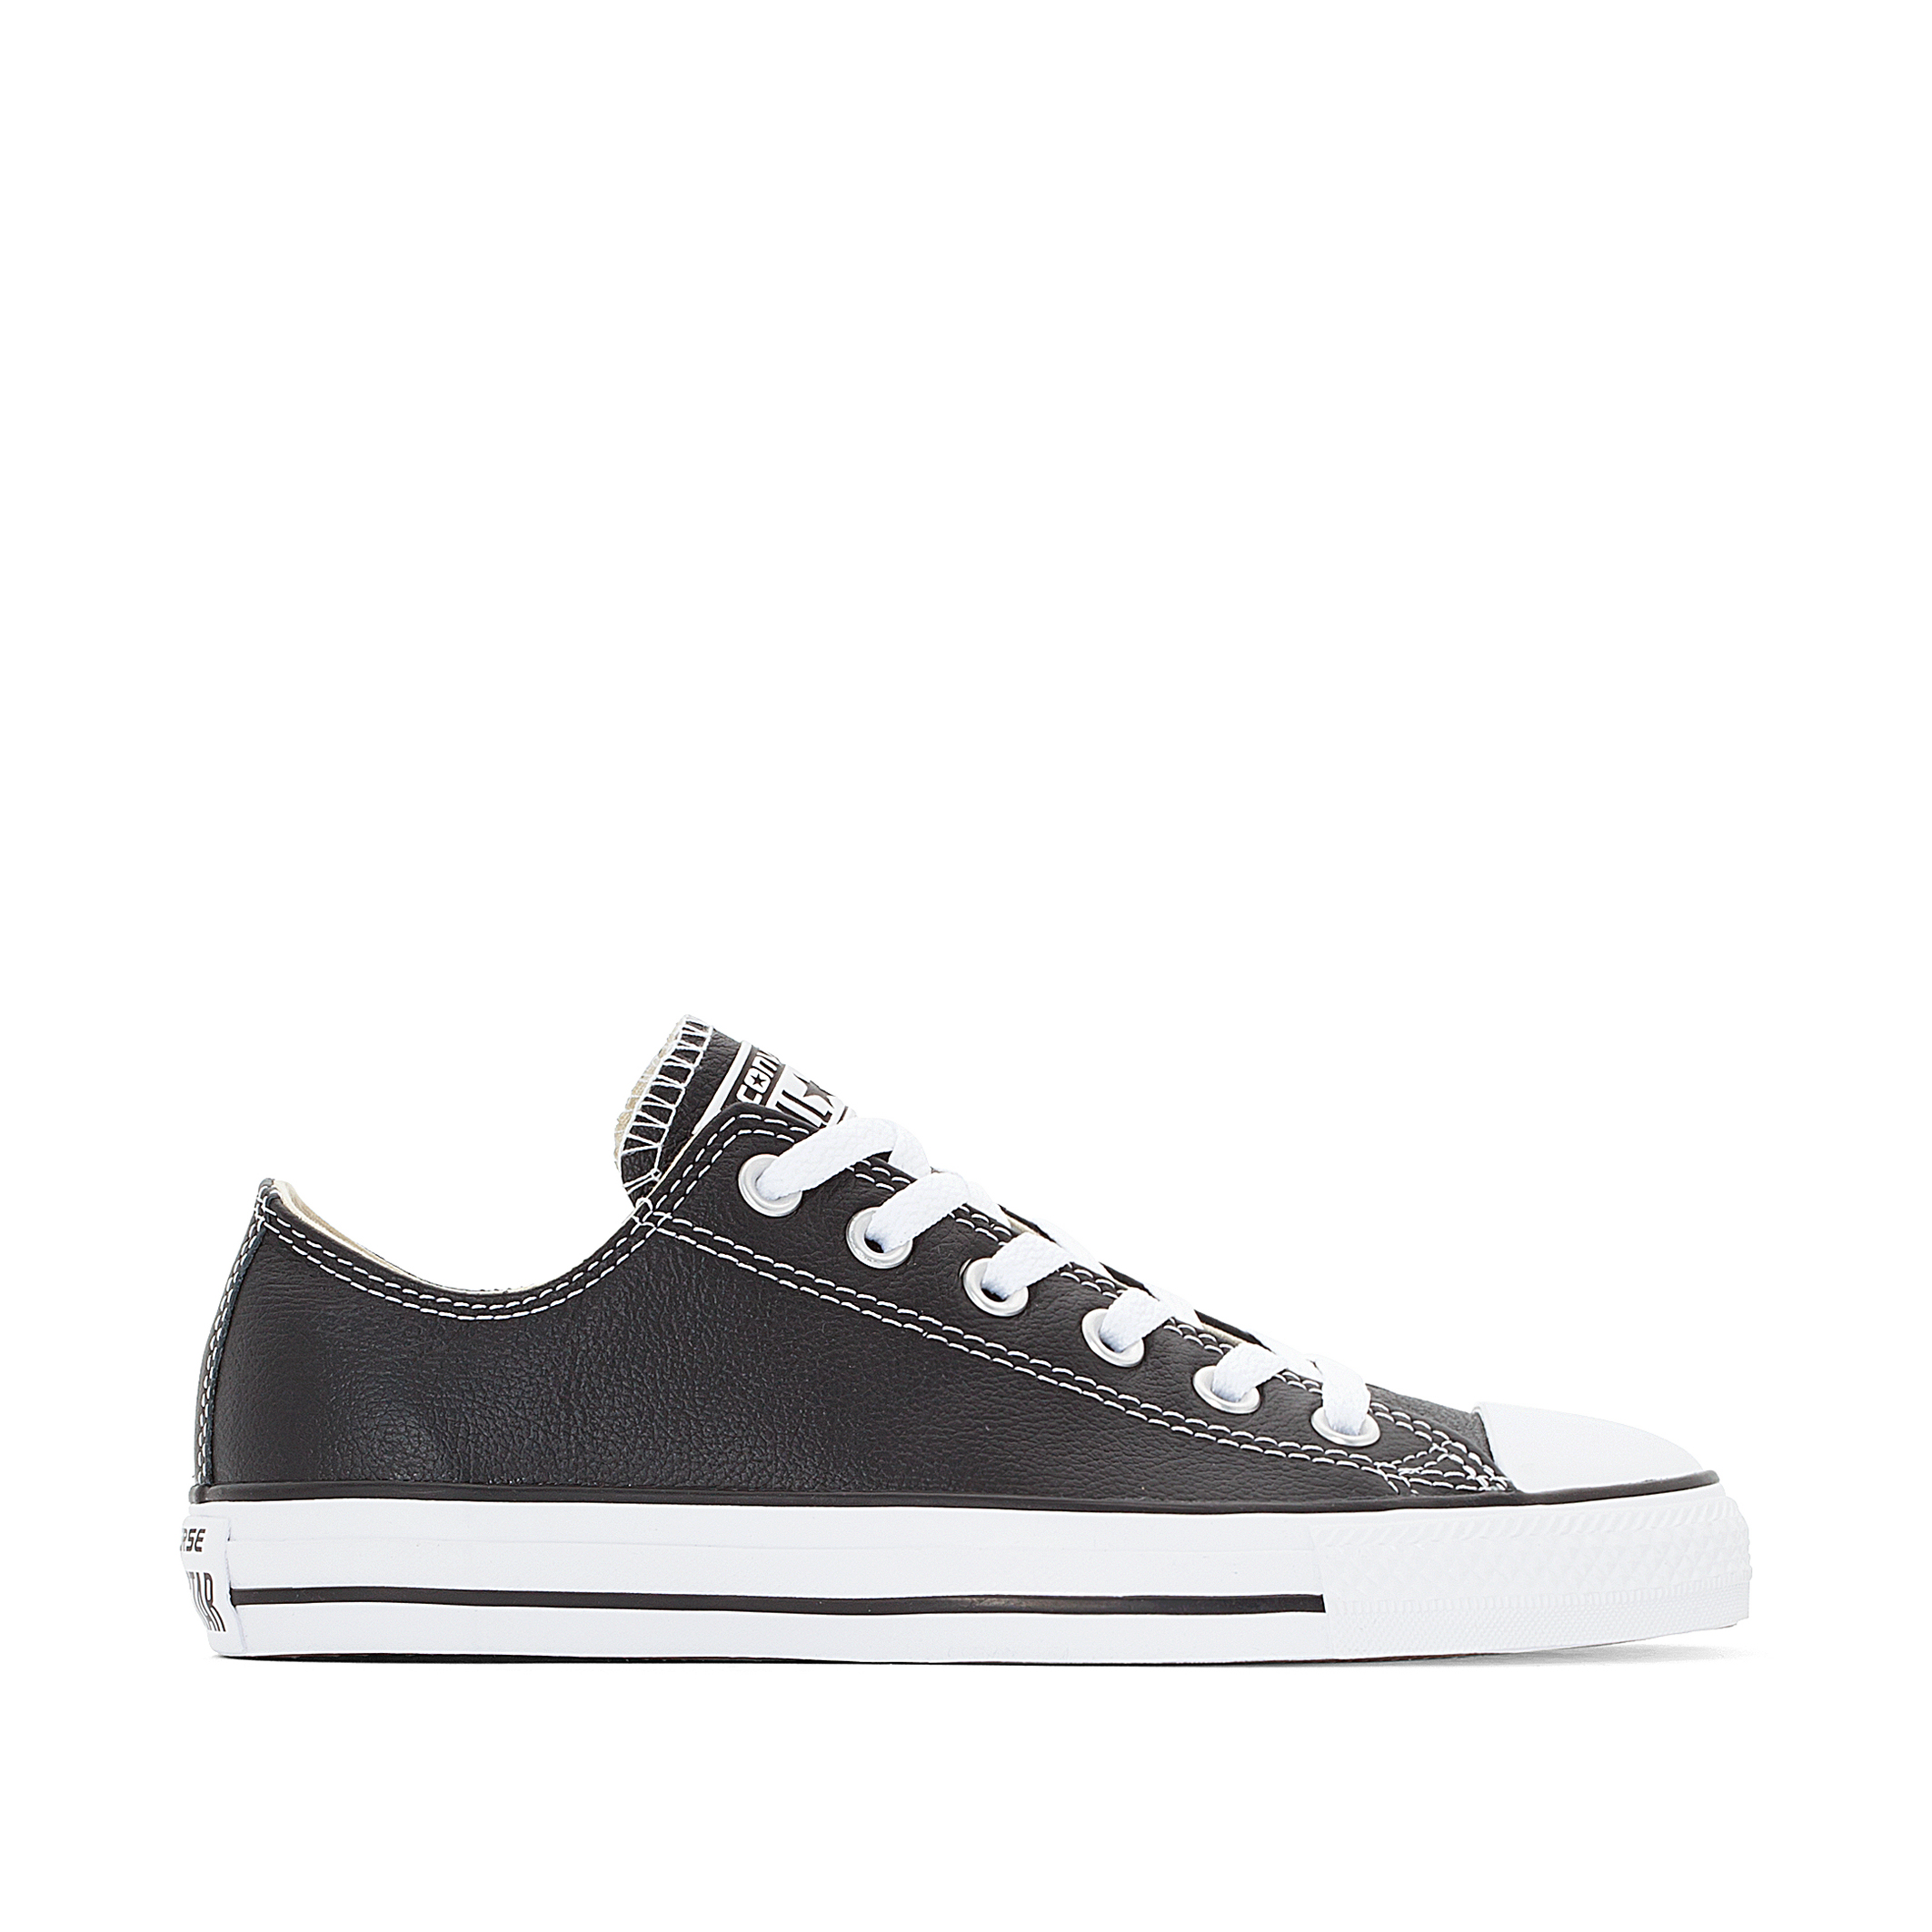 Chuck taylor all star ox leather low 